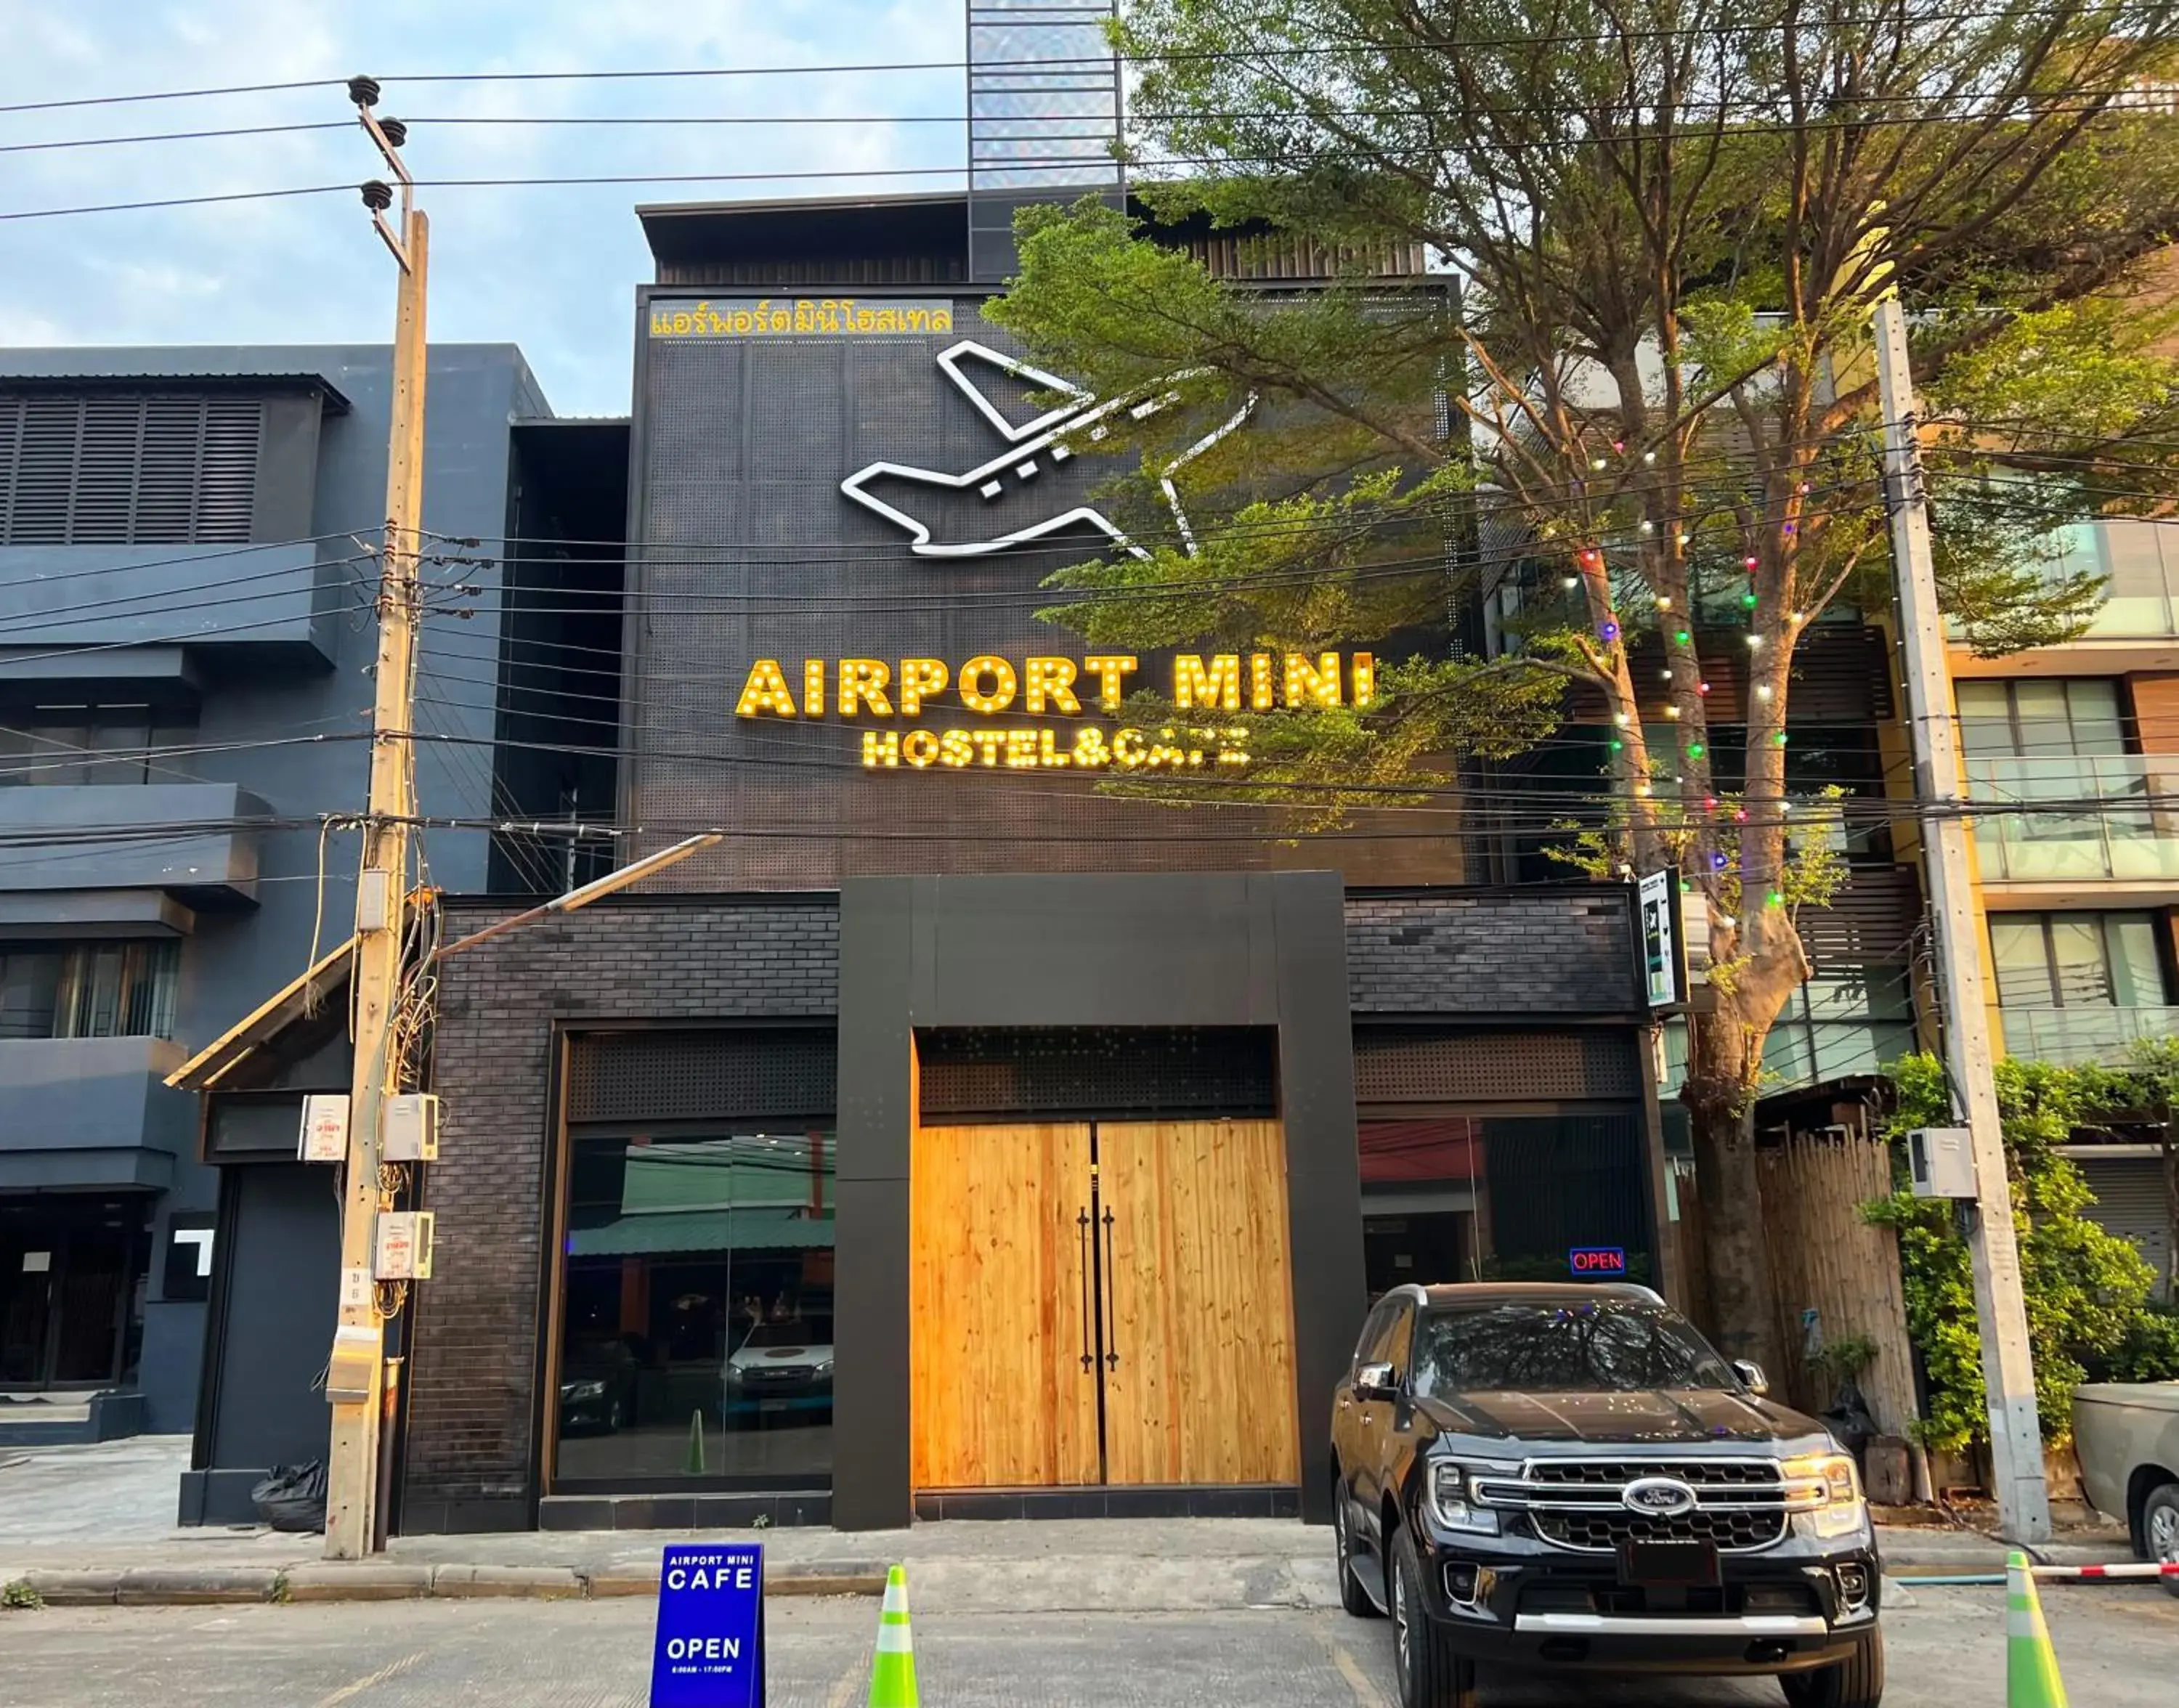 Property Building in Airport Mini Hostel at Don Muang Airport